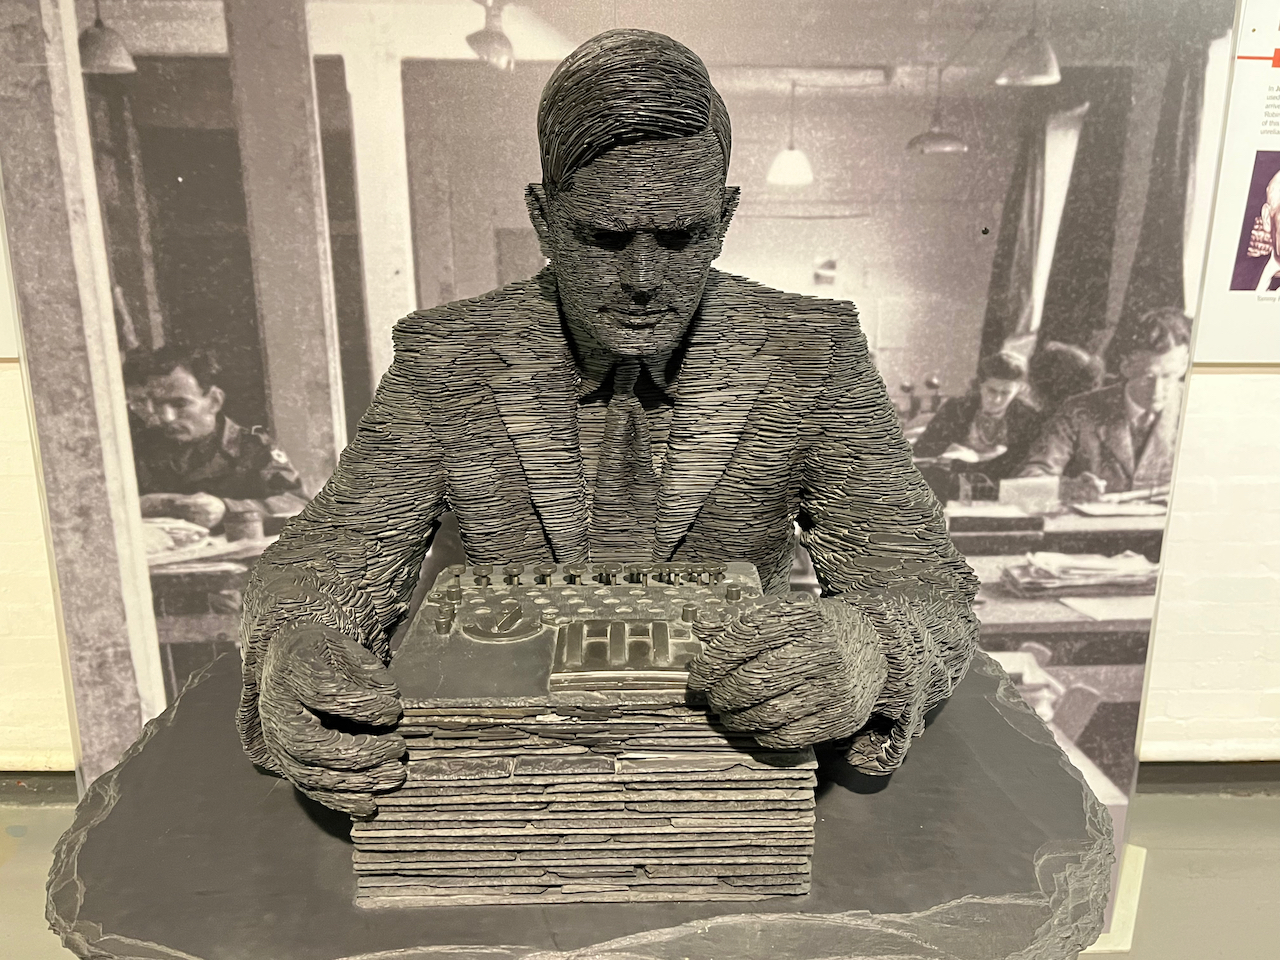 A closer view of the Alan Turing statue, showing his head and upper body, and the Enigma machine he's holding on the desk.